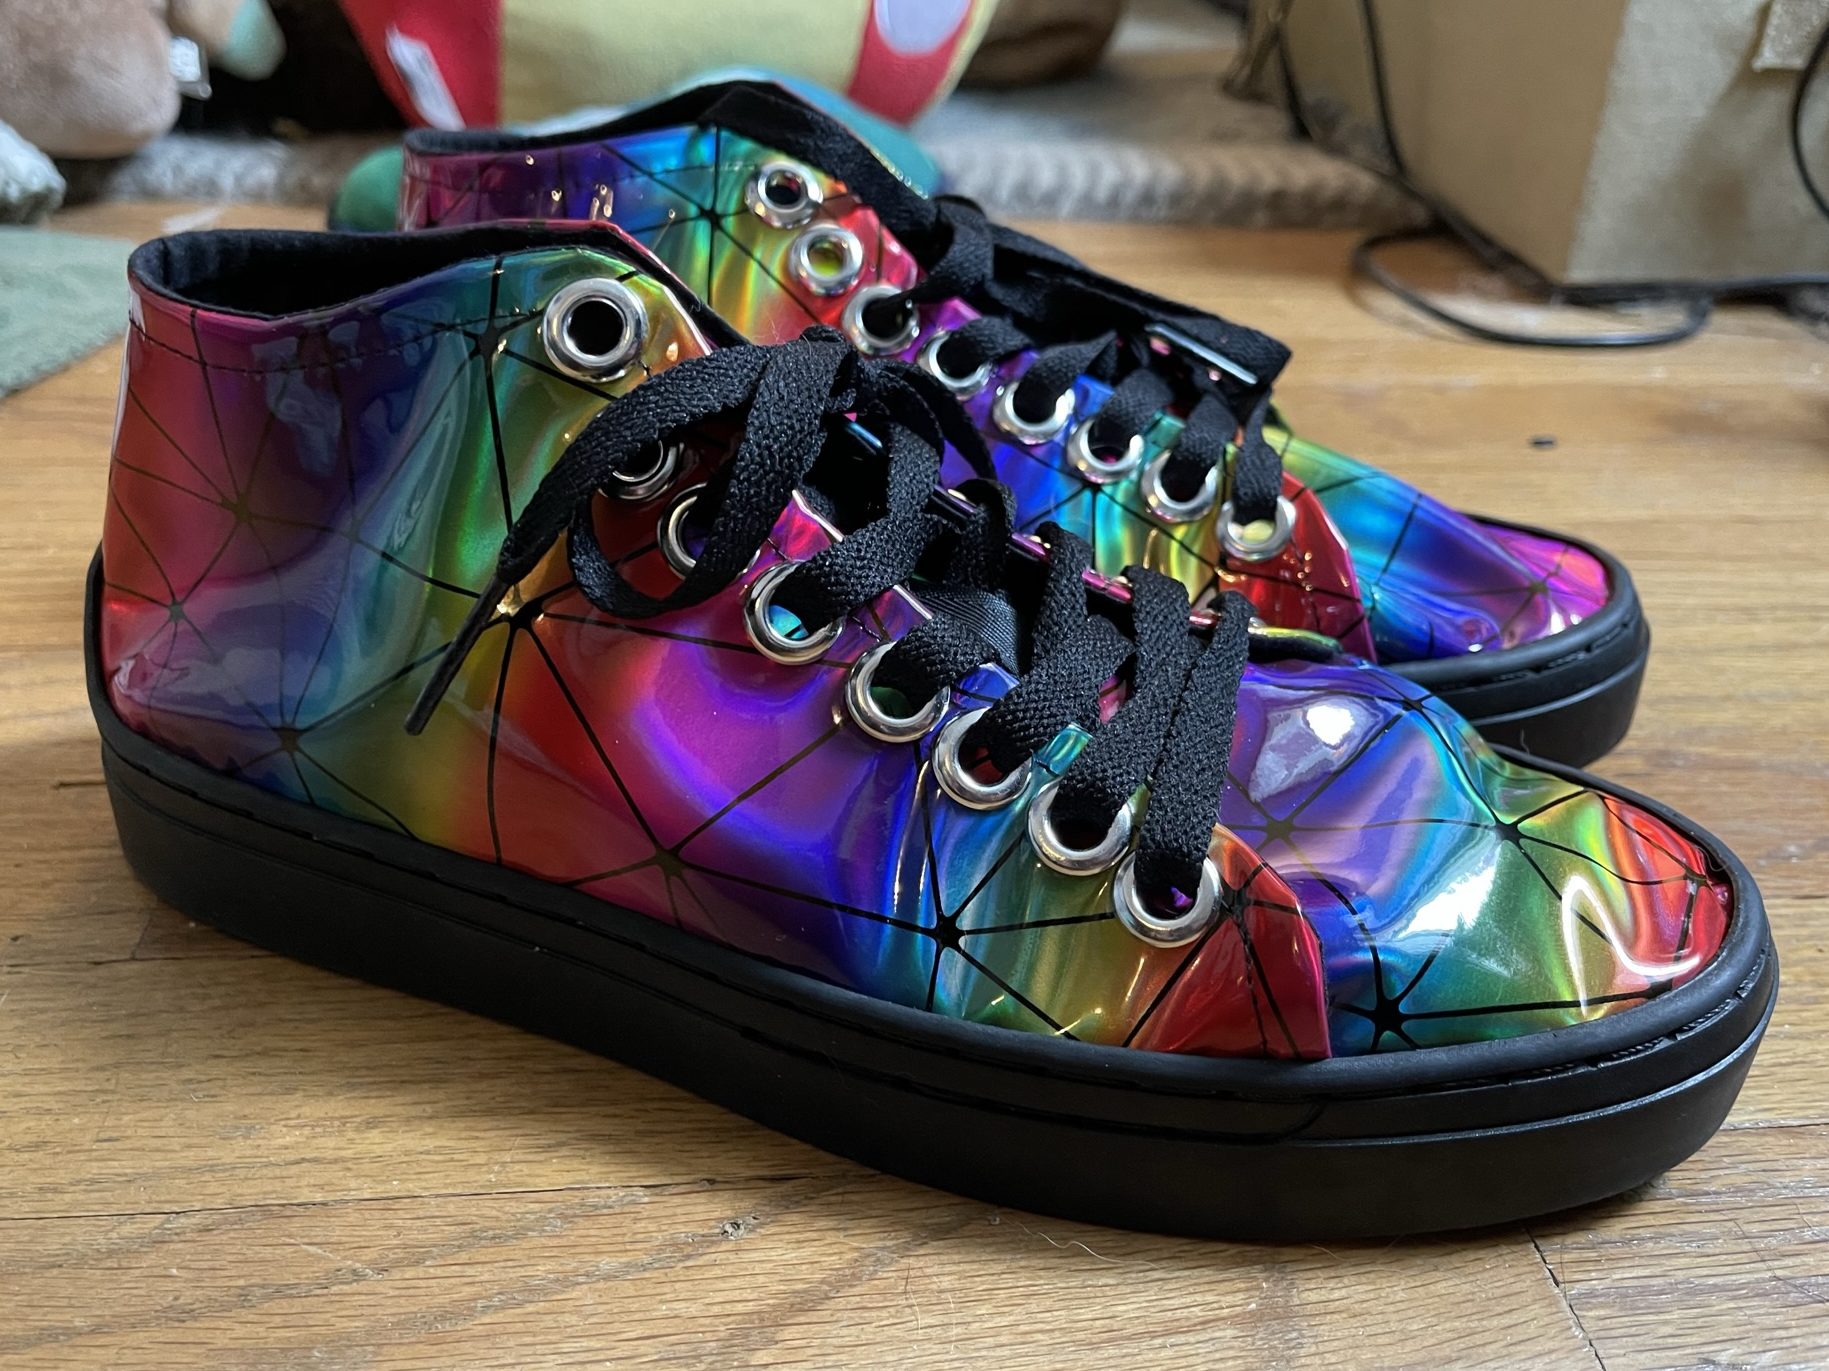 A photo of a pair of high-top sneakers made out of shiny rainbow vinyl with black rubber soles and black laces.